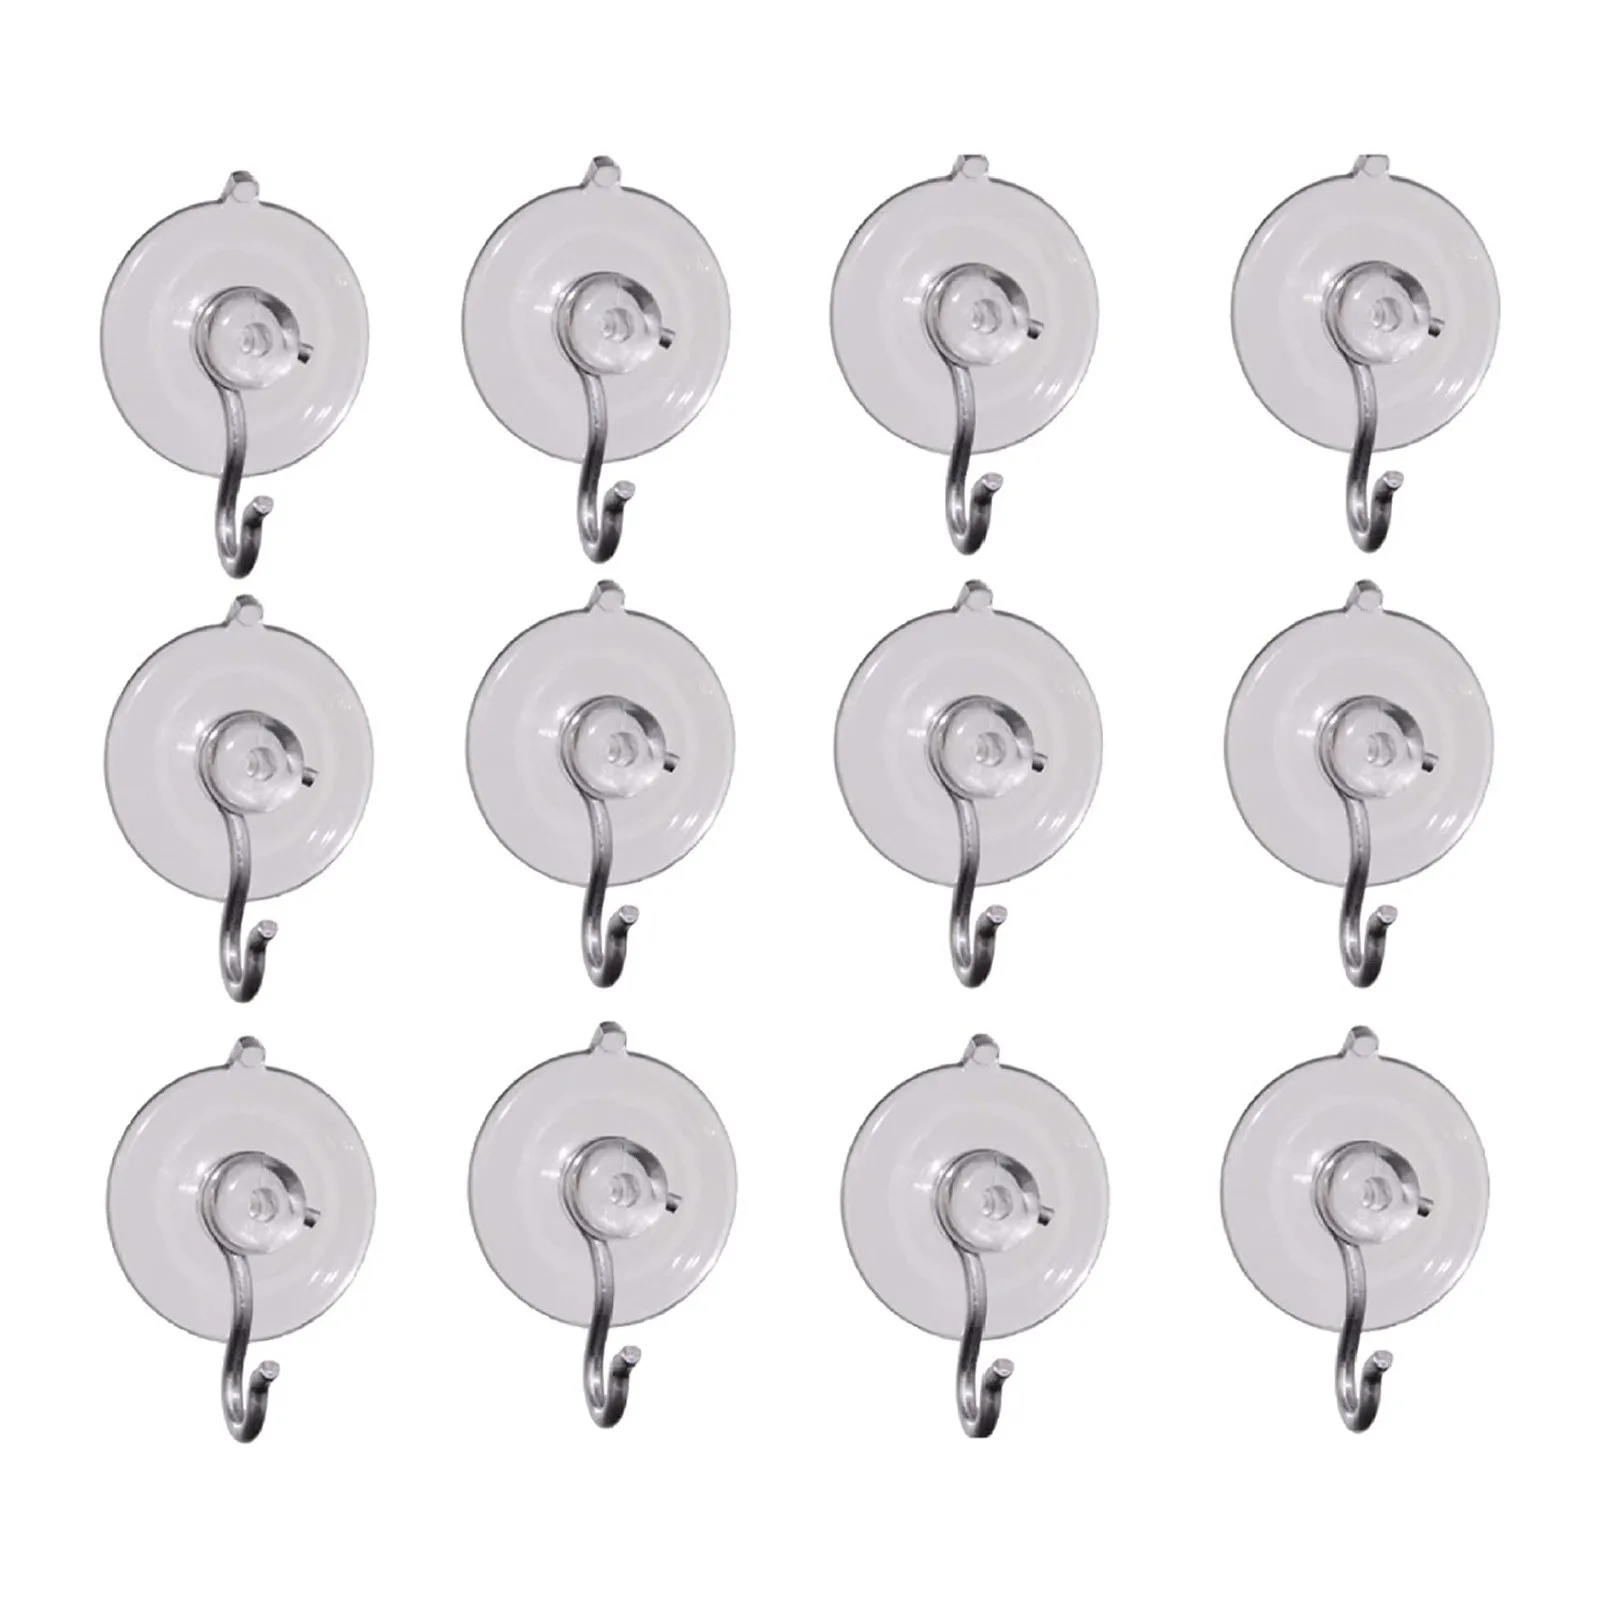 

12pcs Wall Hooks Waterproof Oilproof Self Adhesive Transparent Reusable Seamless Hanging Hook For Kitchen Bathroom Office #M0